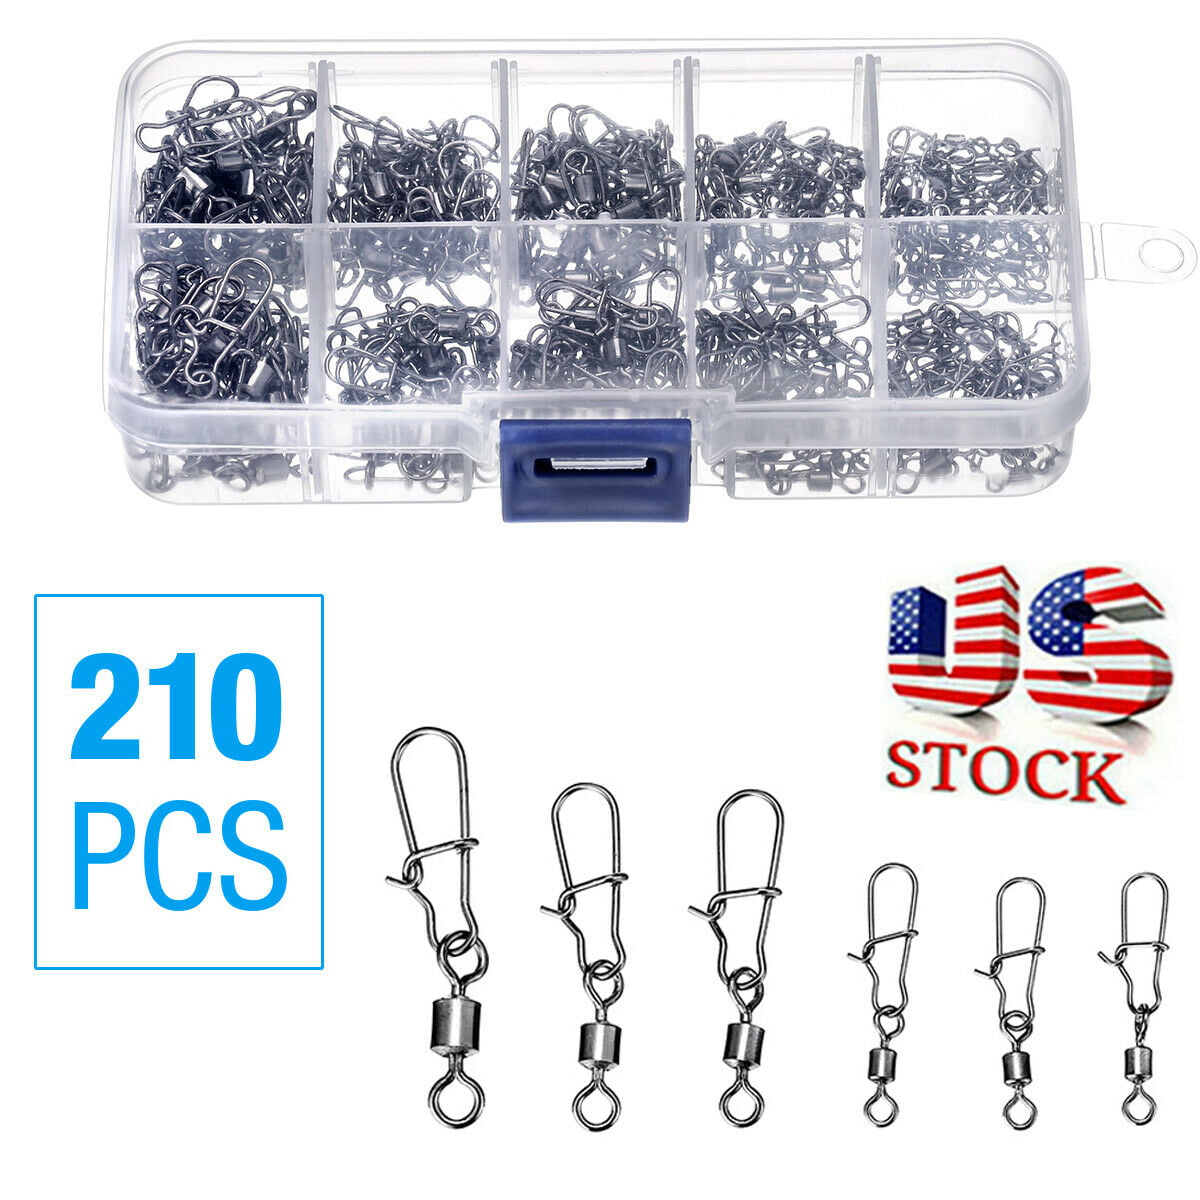 50Pc Snap Swivels Ball Bearing Fishing Connector W/ Coastlock Stainless Steel US 